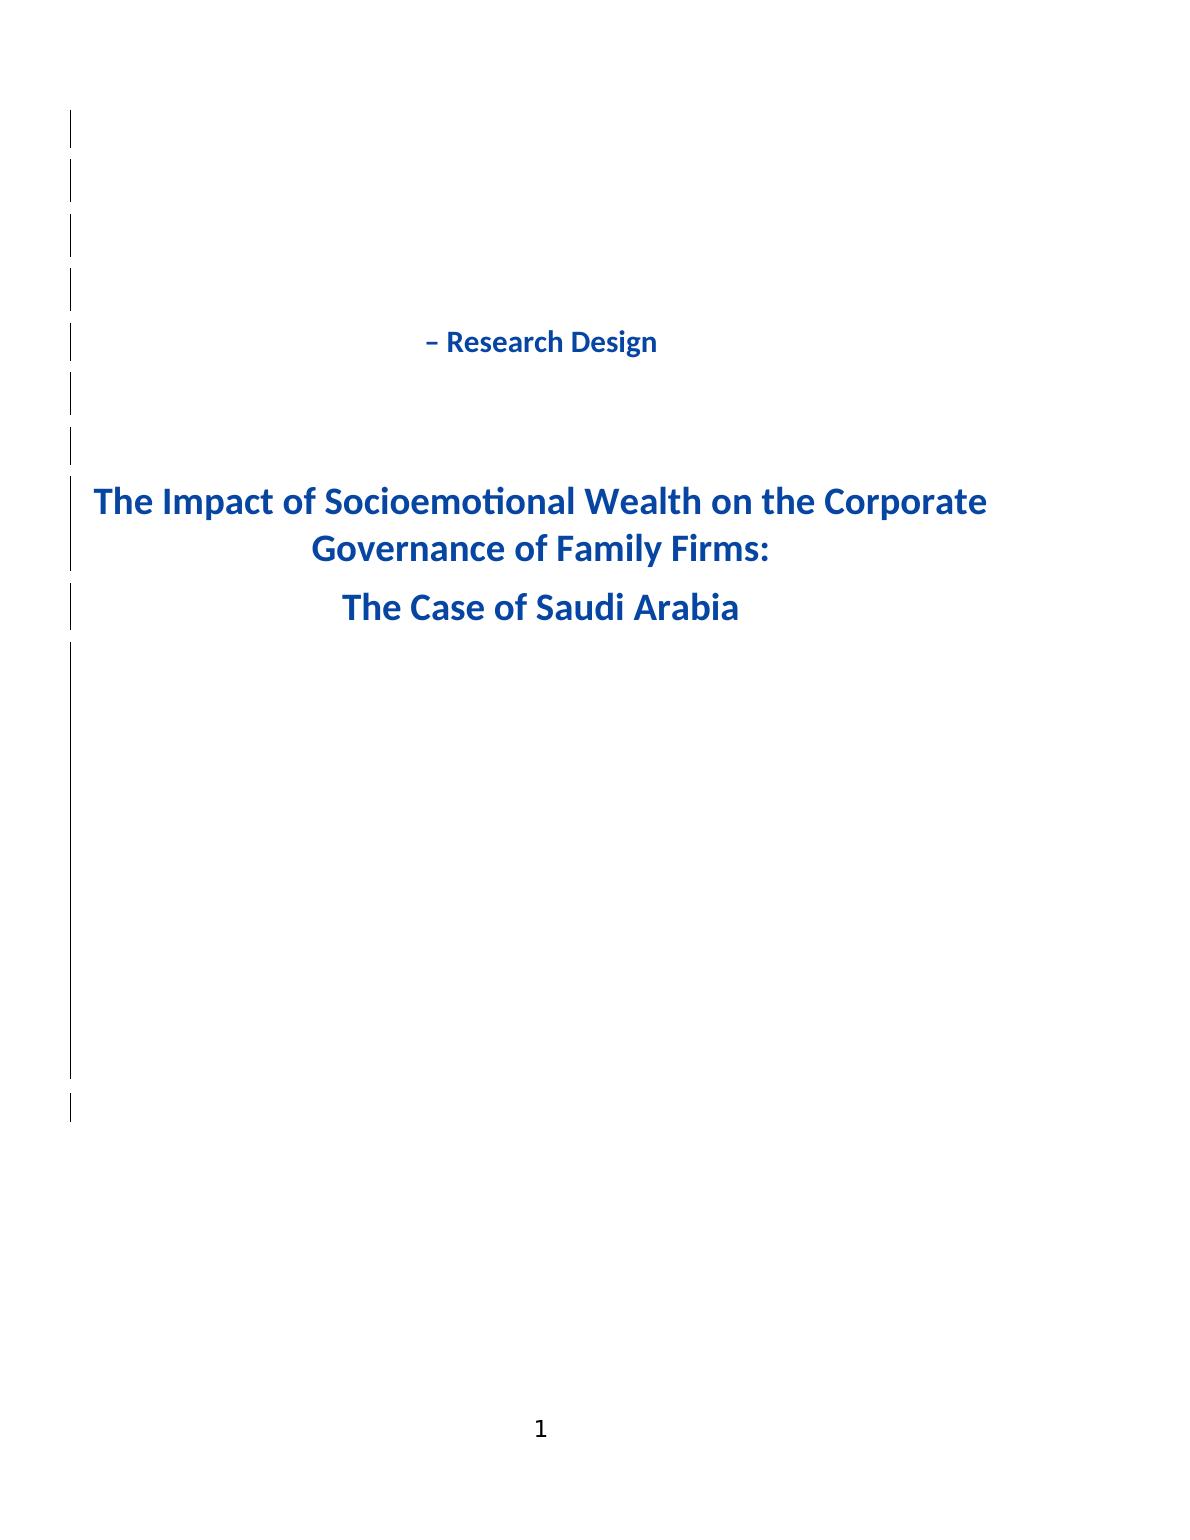 The Impact of Socioemotional Wealth on the Corporate Governance of Family Firms: The Case of Saudi Arabia_1